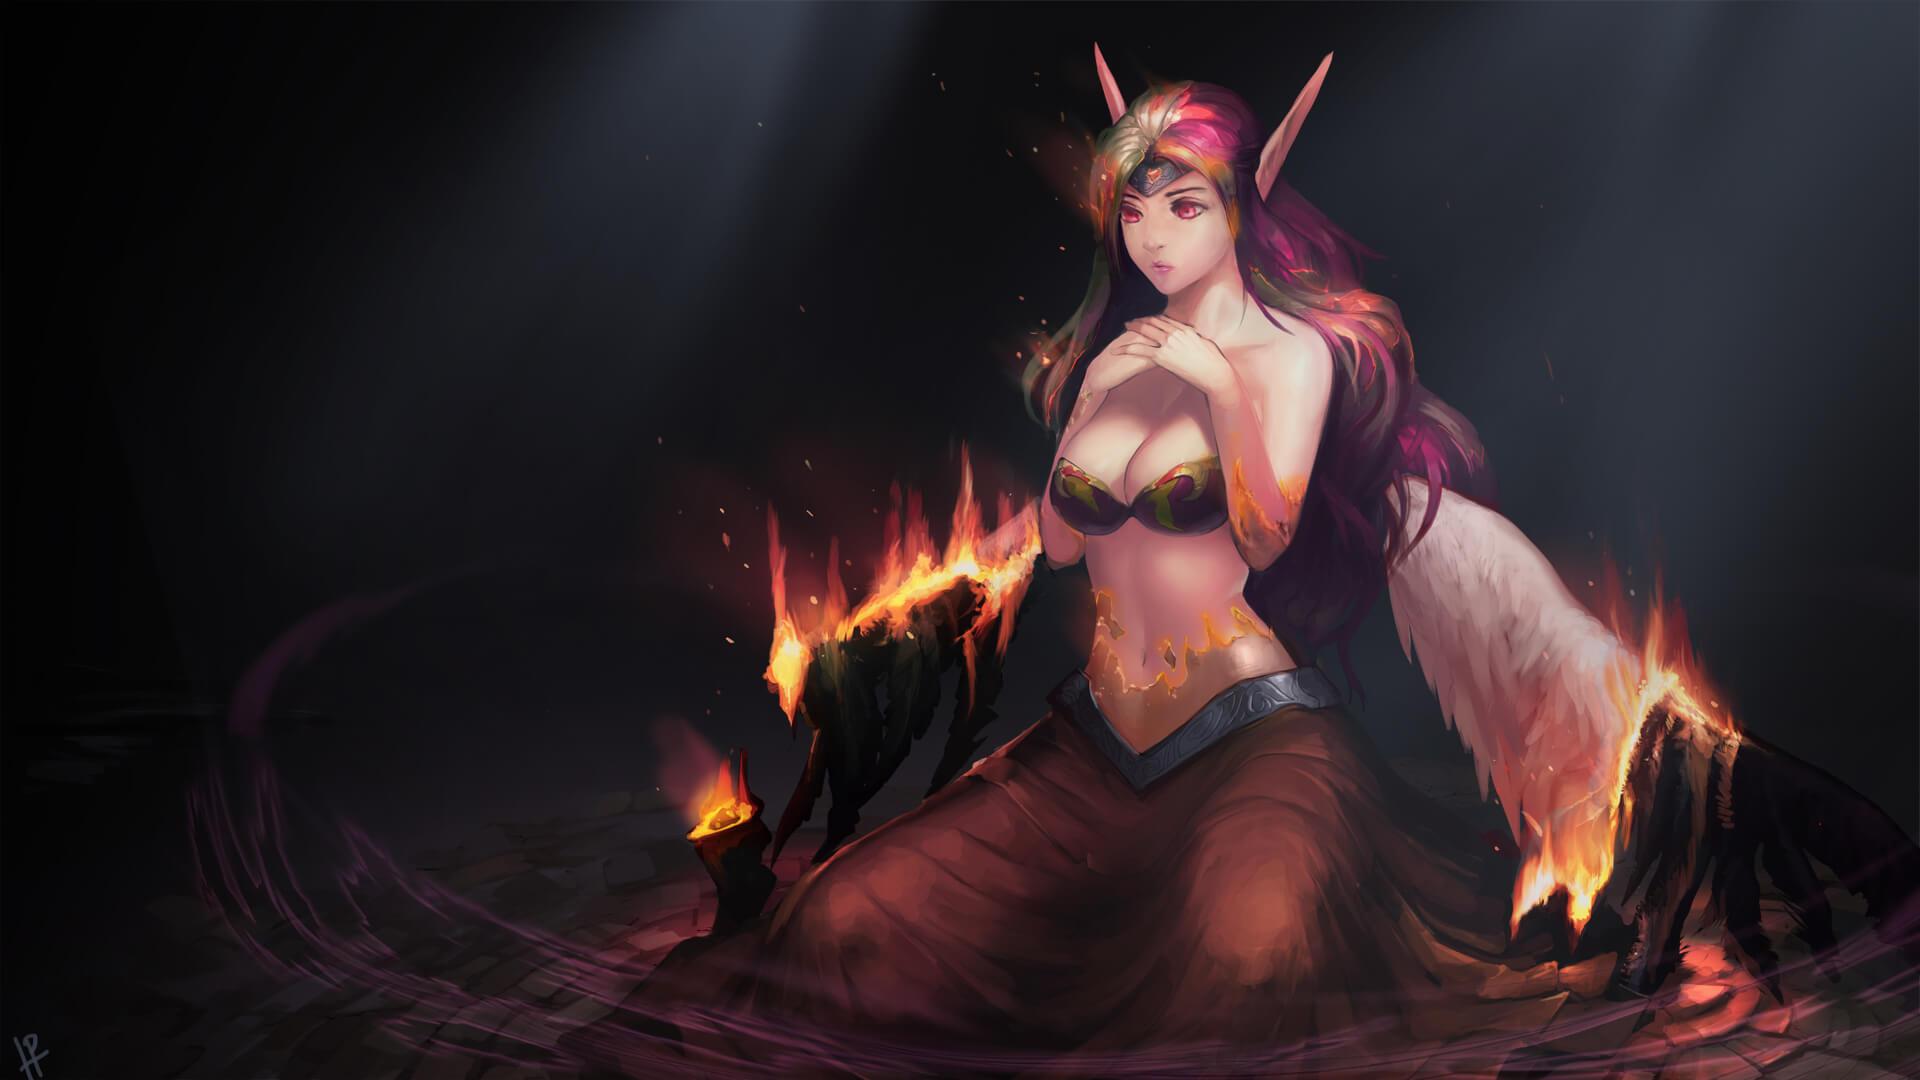 49 Hot Pictures Of Morgana From League Of Legends Are Here To Take Your Breath Away | Best Of Comic Books